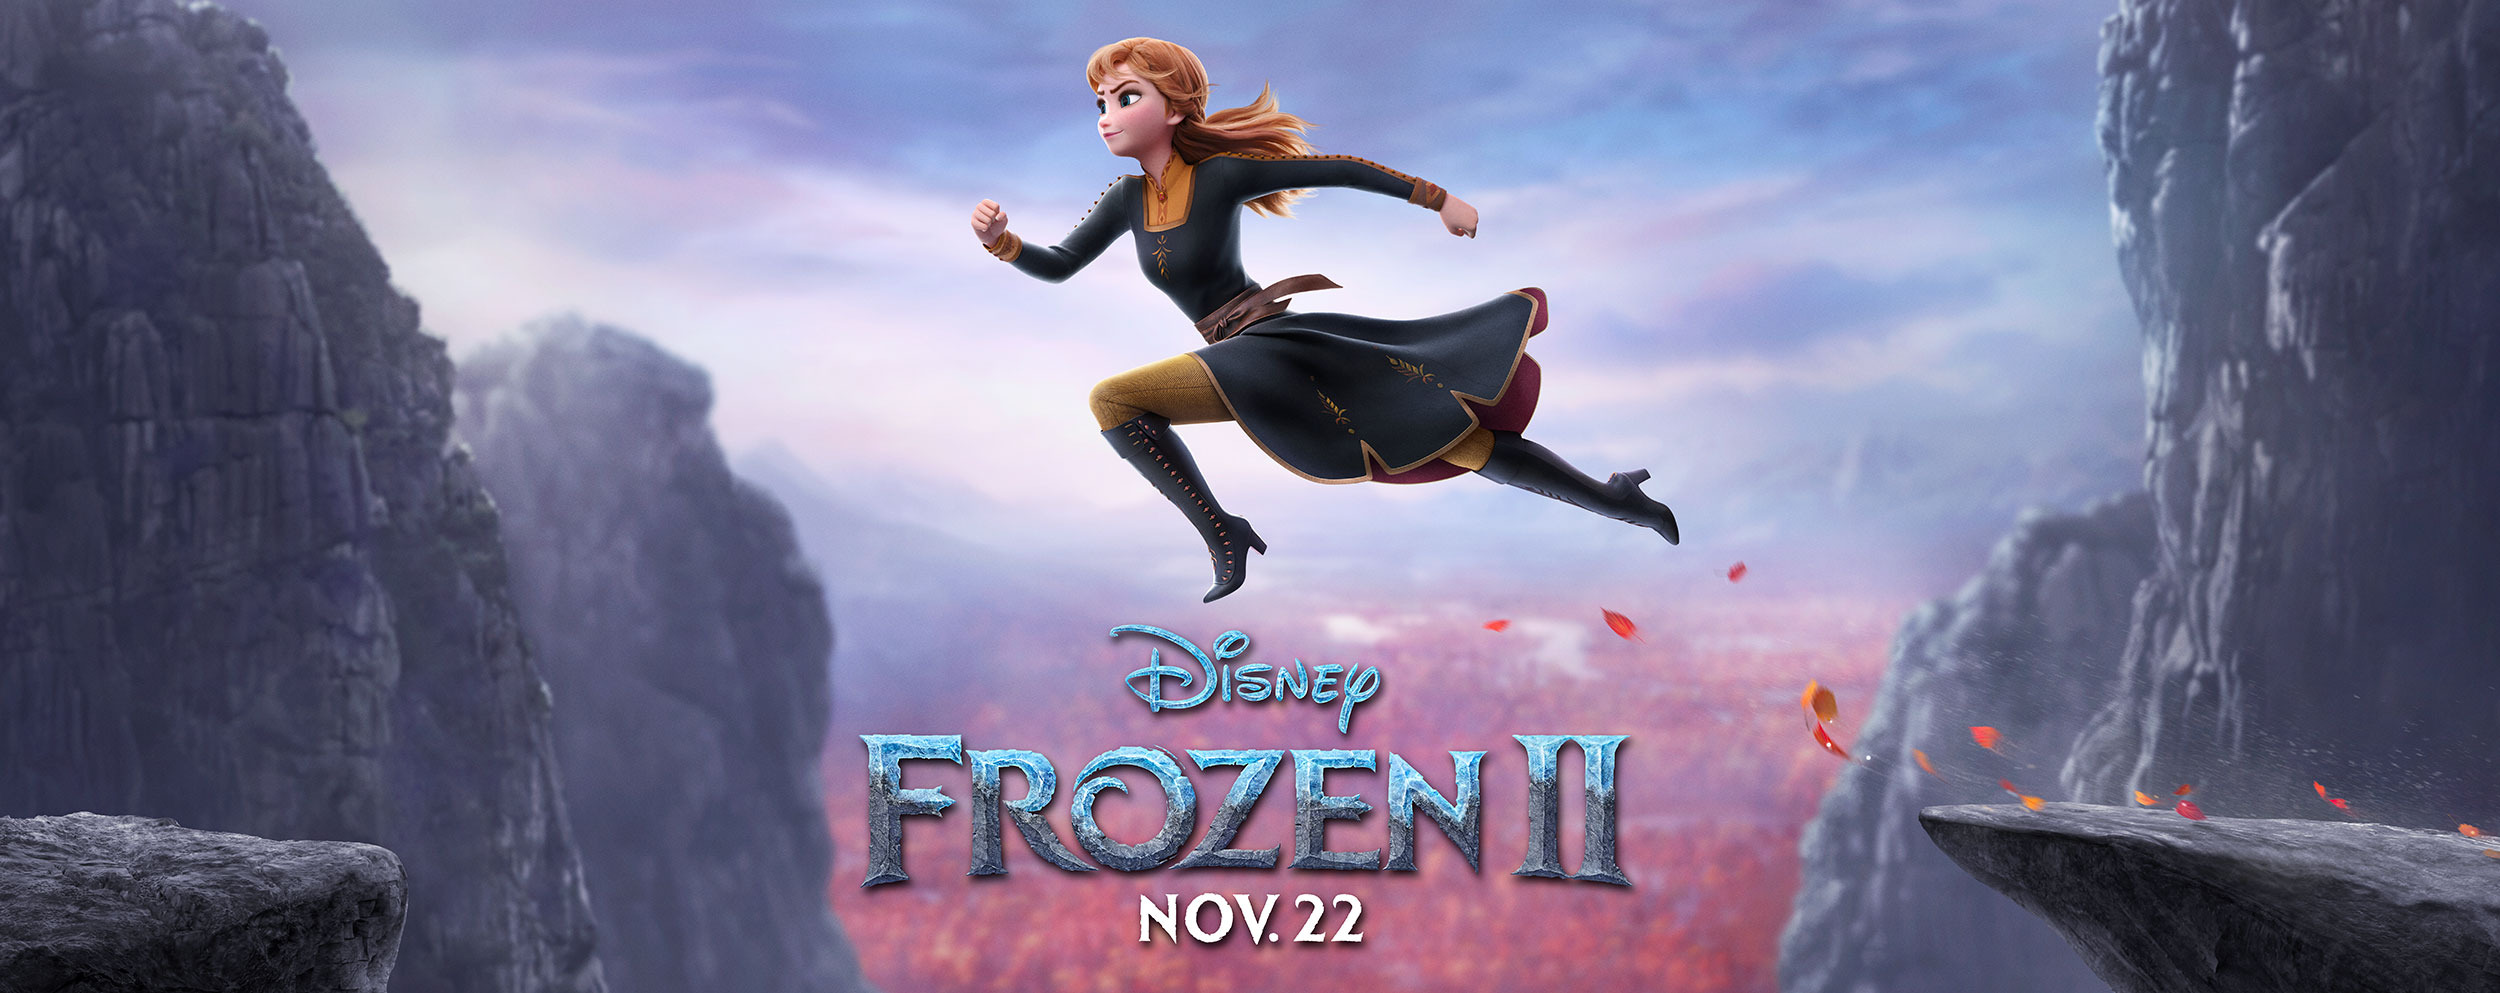 Mega Sized Movie Poster Image for Frozen 2 (#30 of 31)